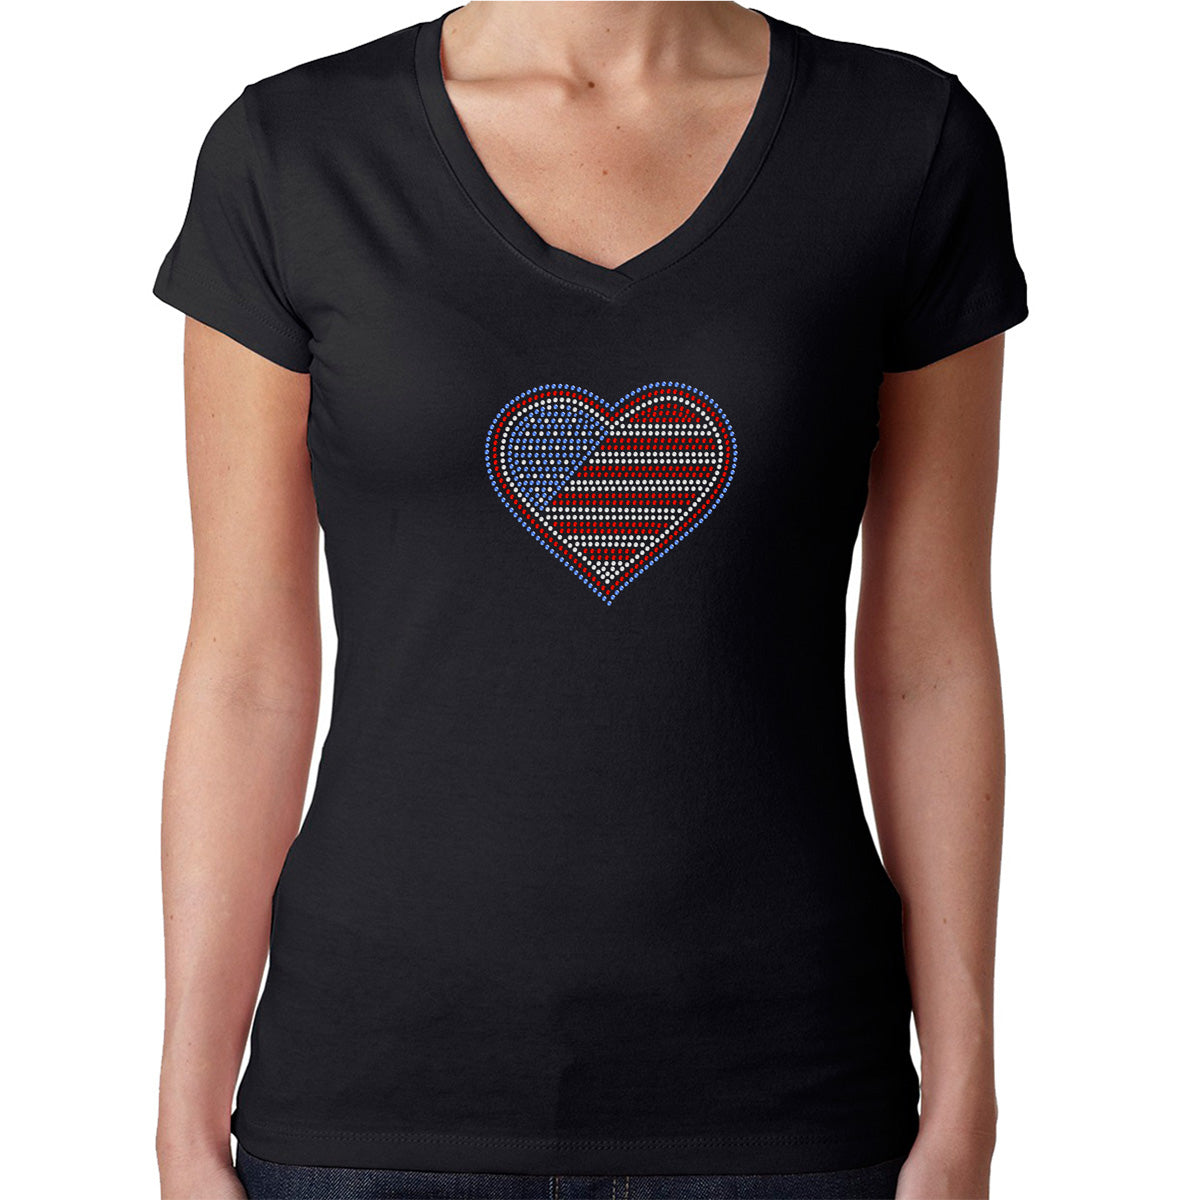 Womens T-Shirt Rhinestone Bling Black Fitted Tee 4th of July Flag Heart Red Blue